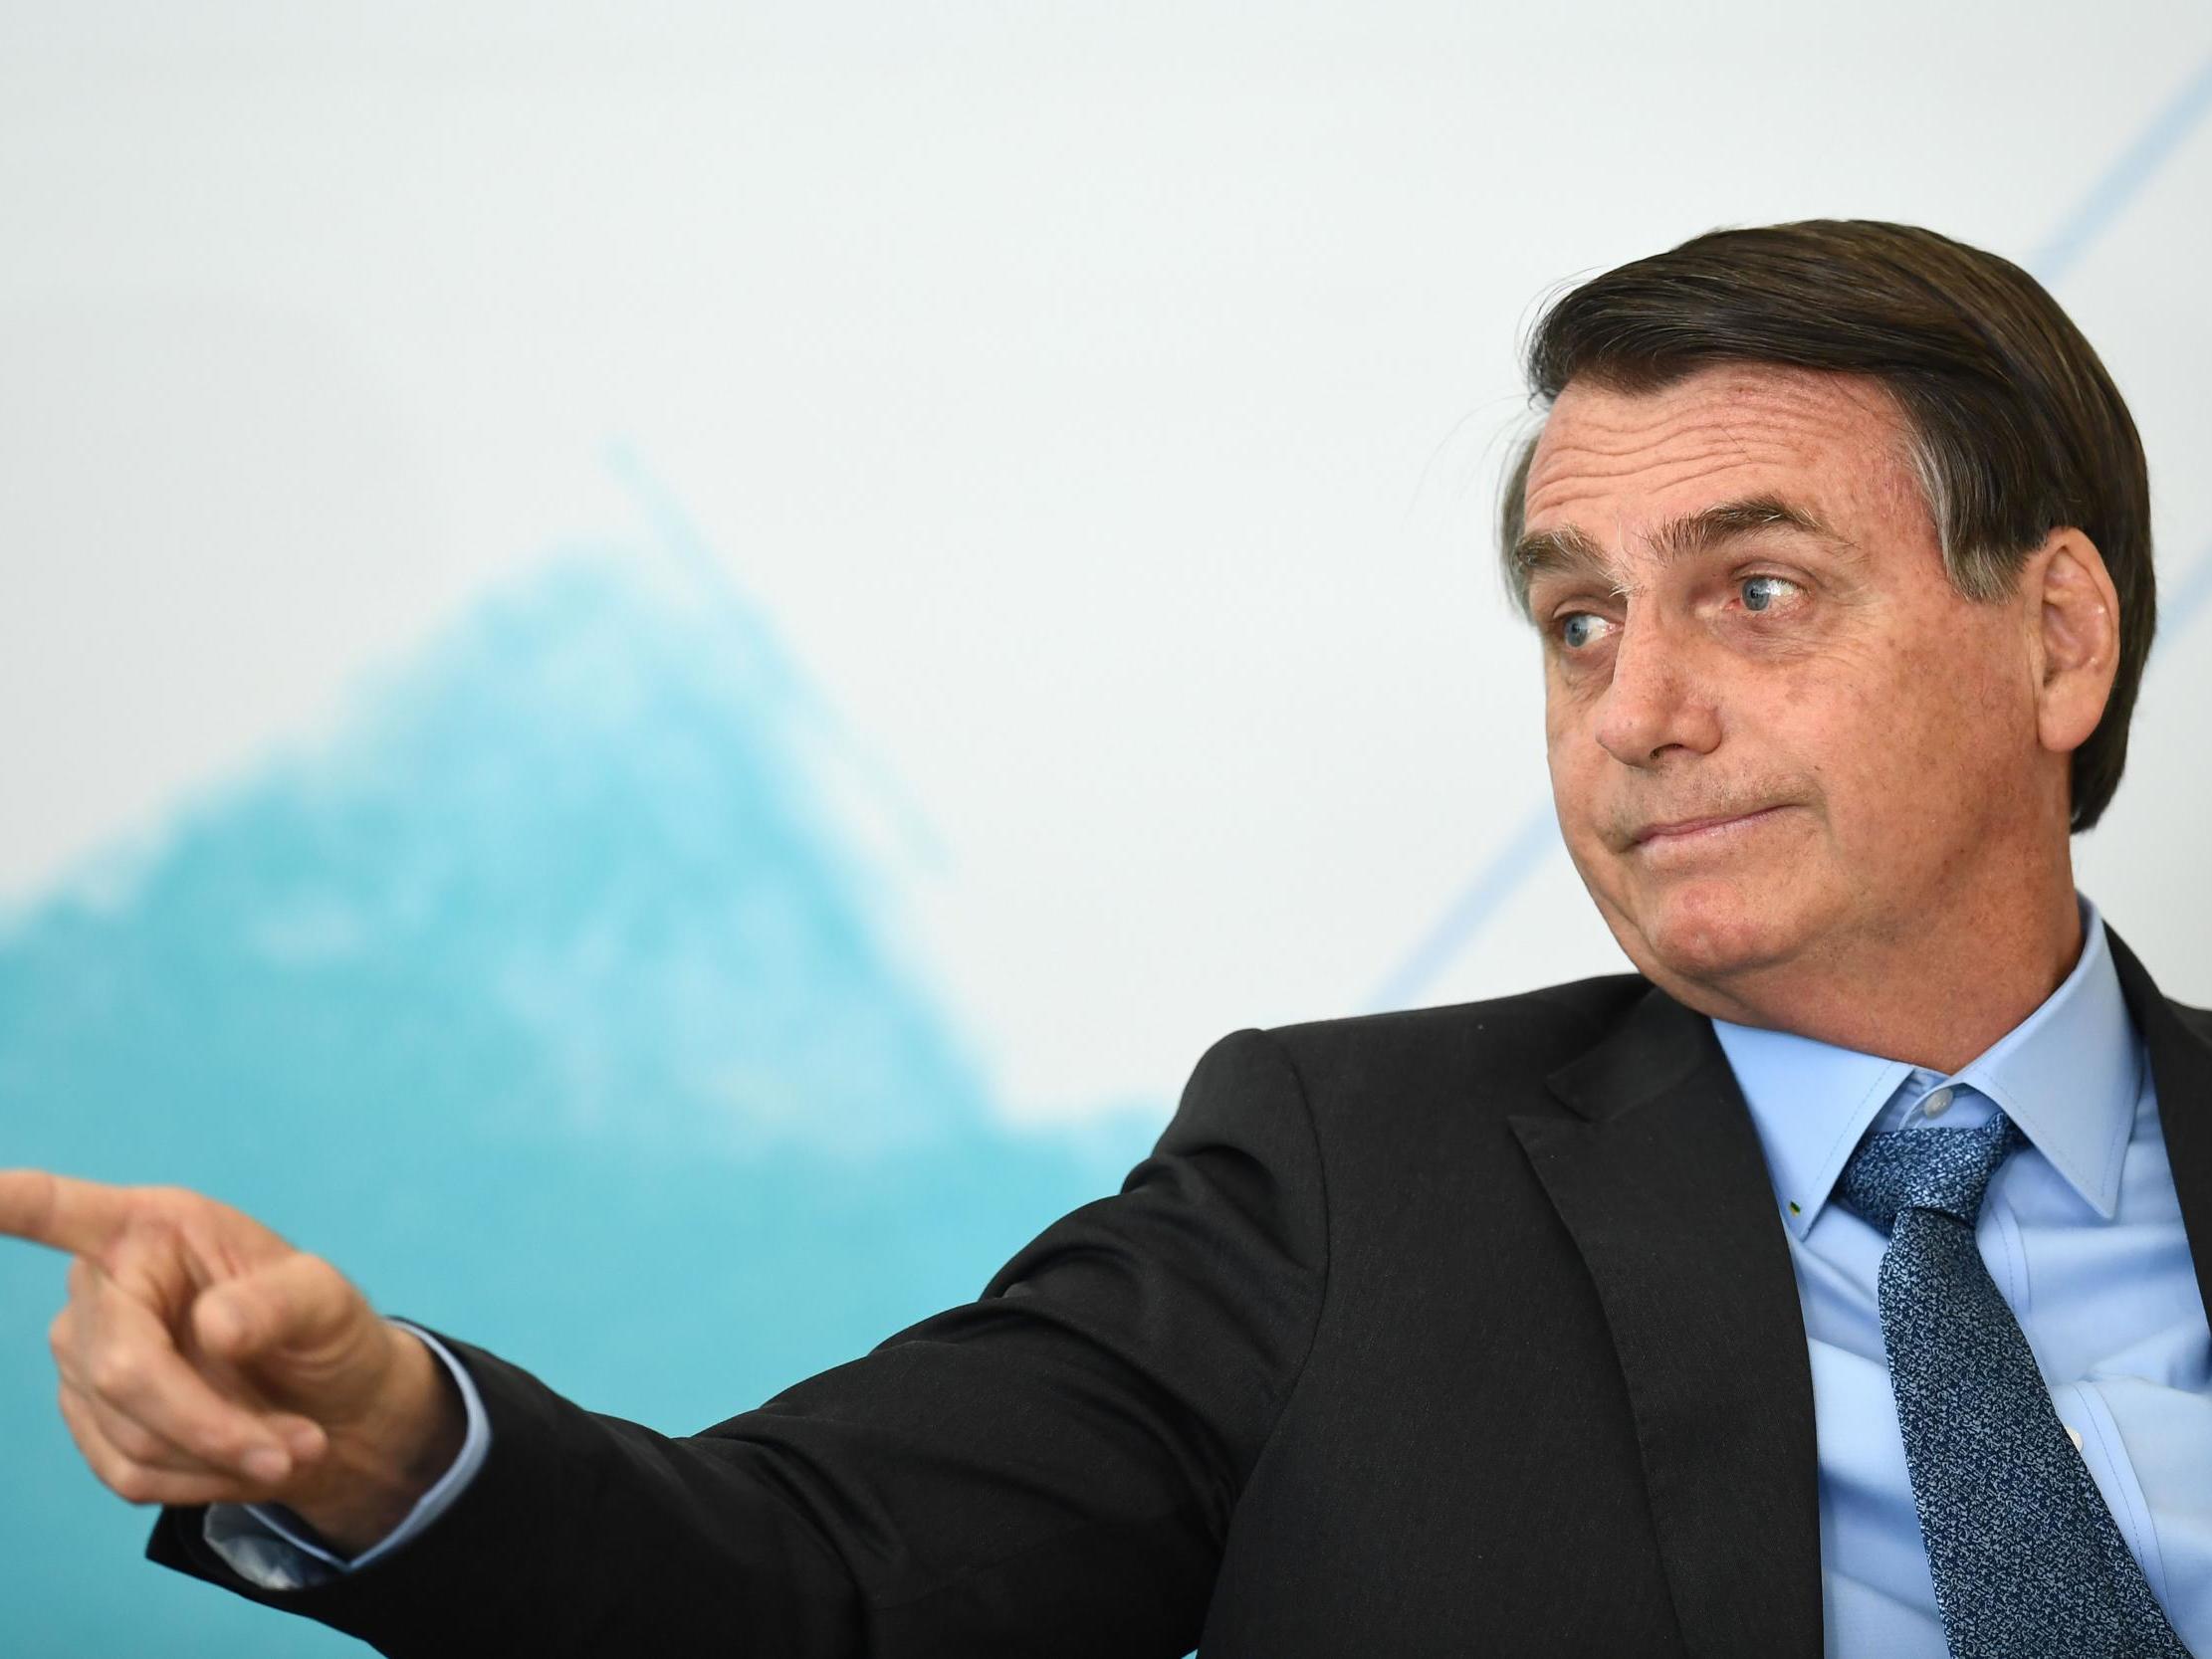 Jair Bolsonaro has rejected worldwide offers of aid to abate the fires as 'colonialism' (AFP/Getty Images)